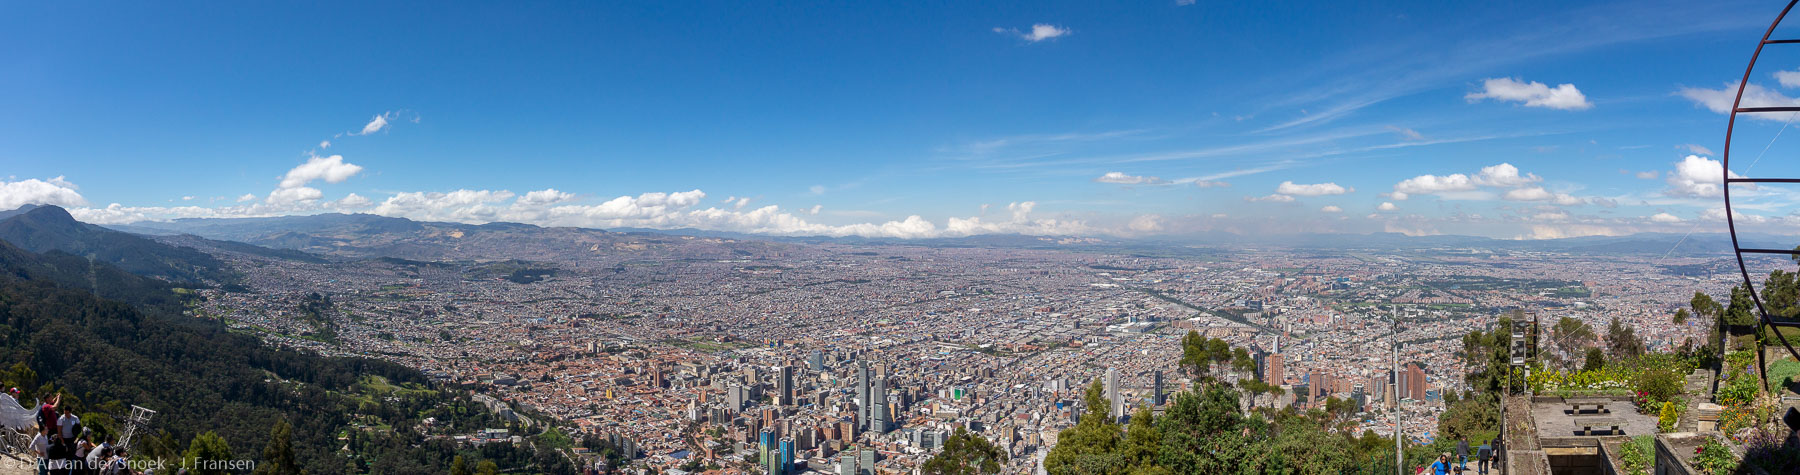 Colombia-0068-Pano.jpg